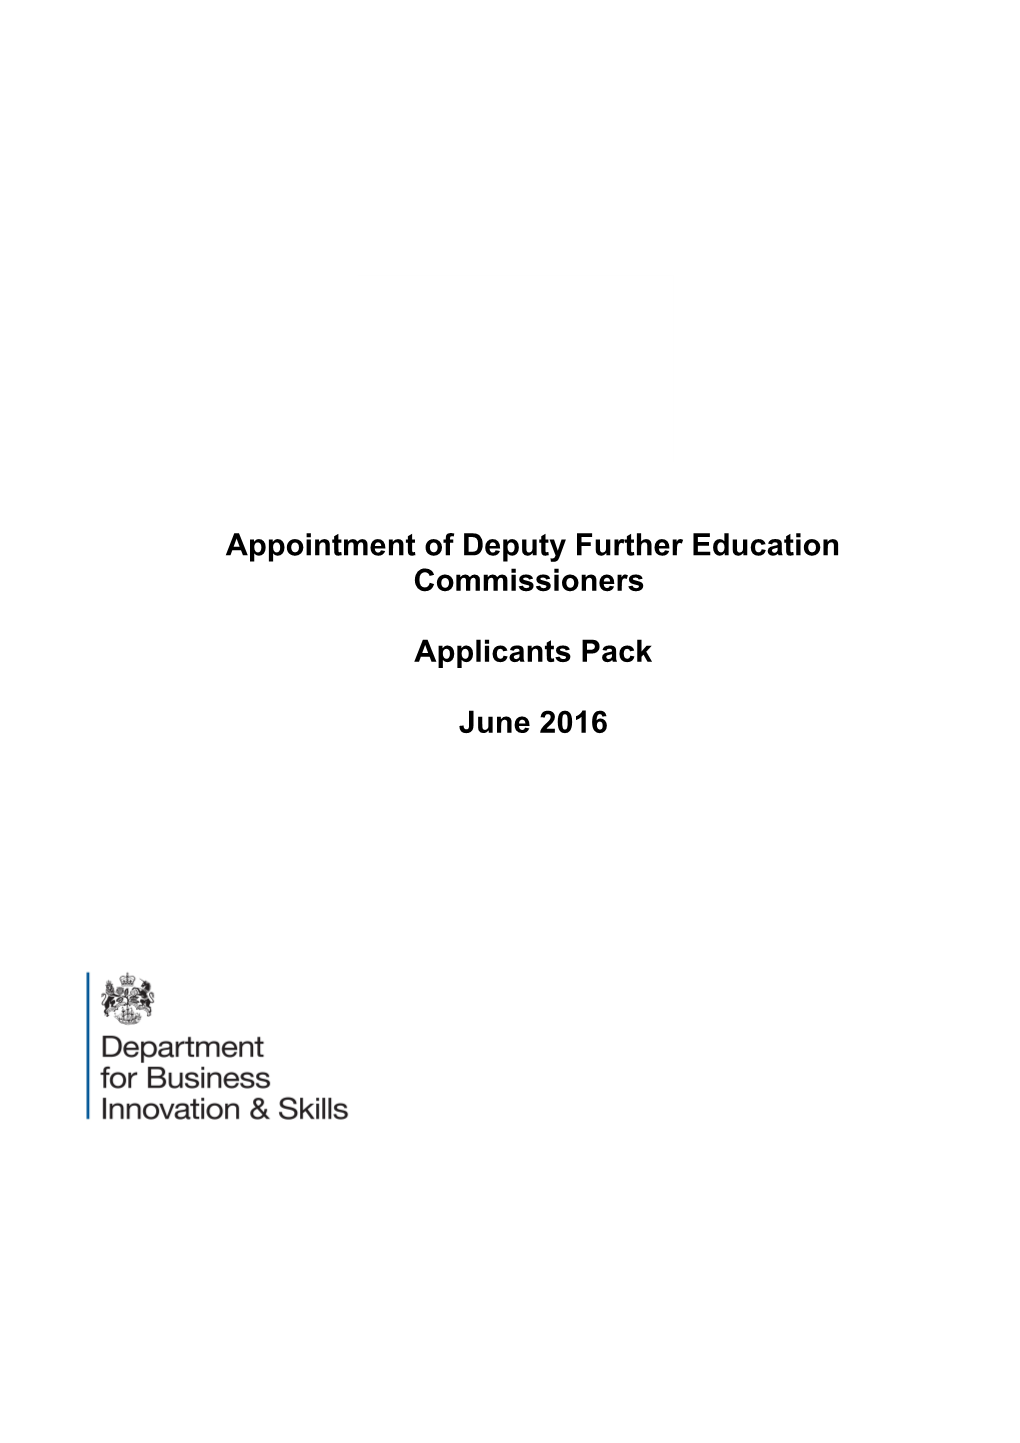 Appointment of Deputy Further Education Commissioners